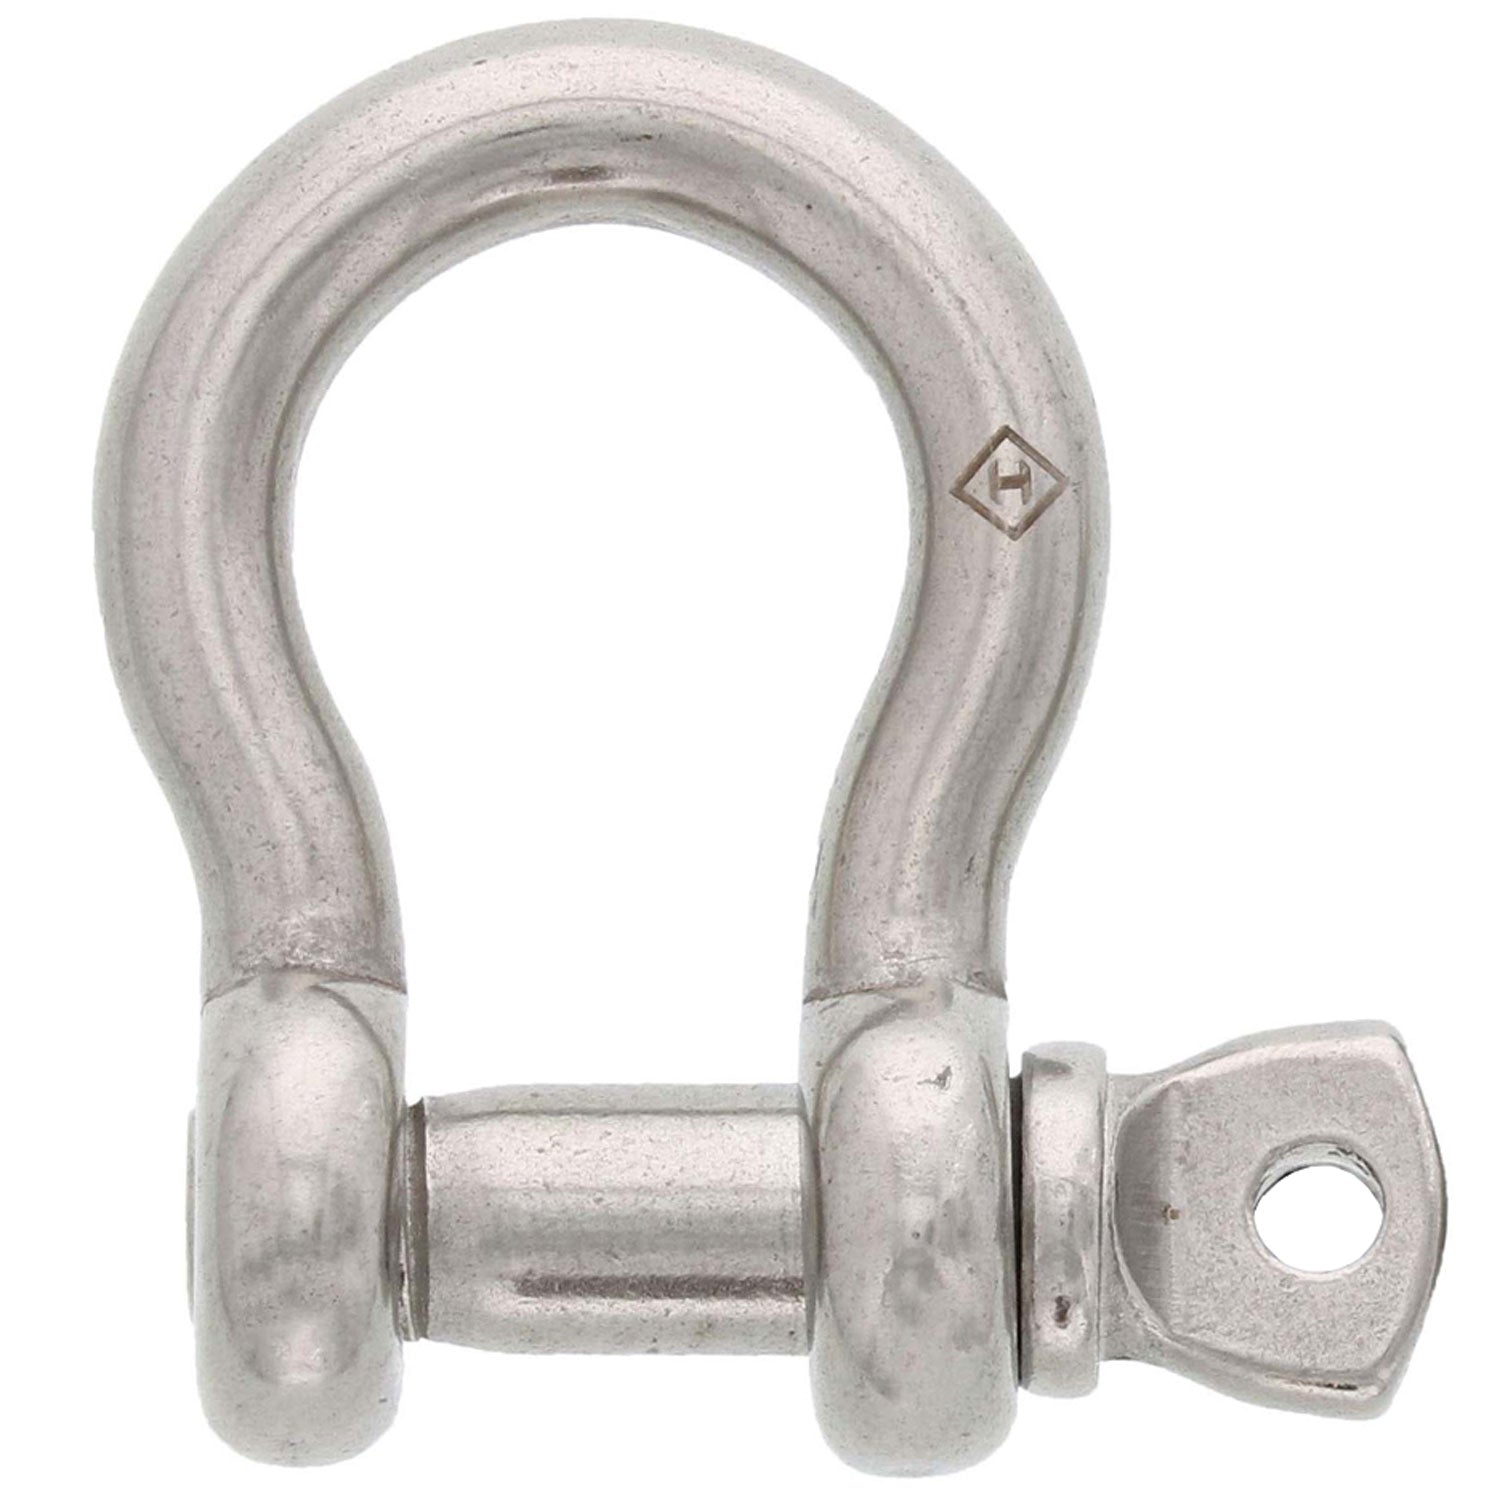 5/16 in., 1718 lb, Type 316 Stainless Steel Screw Pin Anchor Shackle